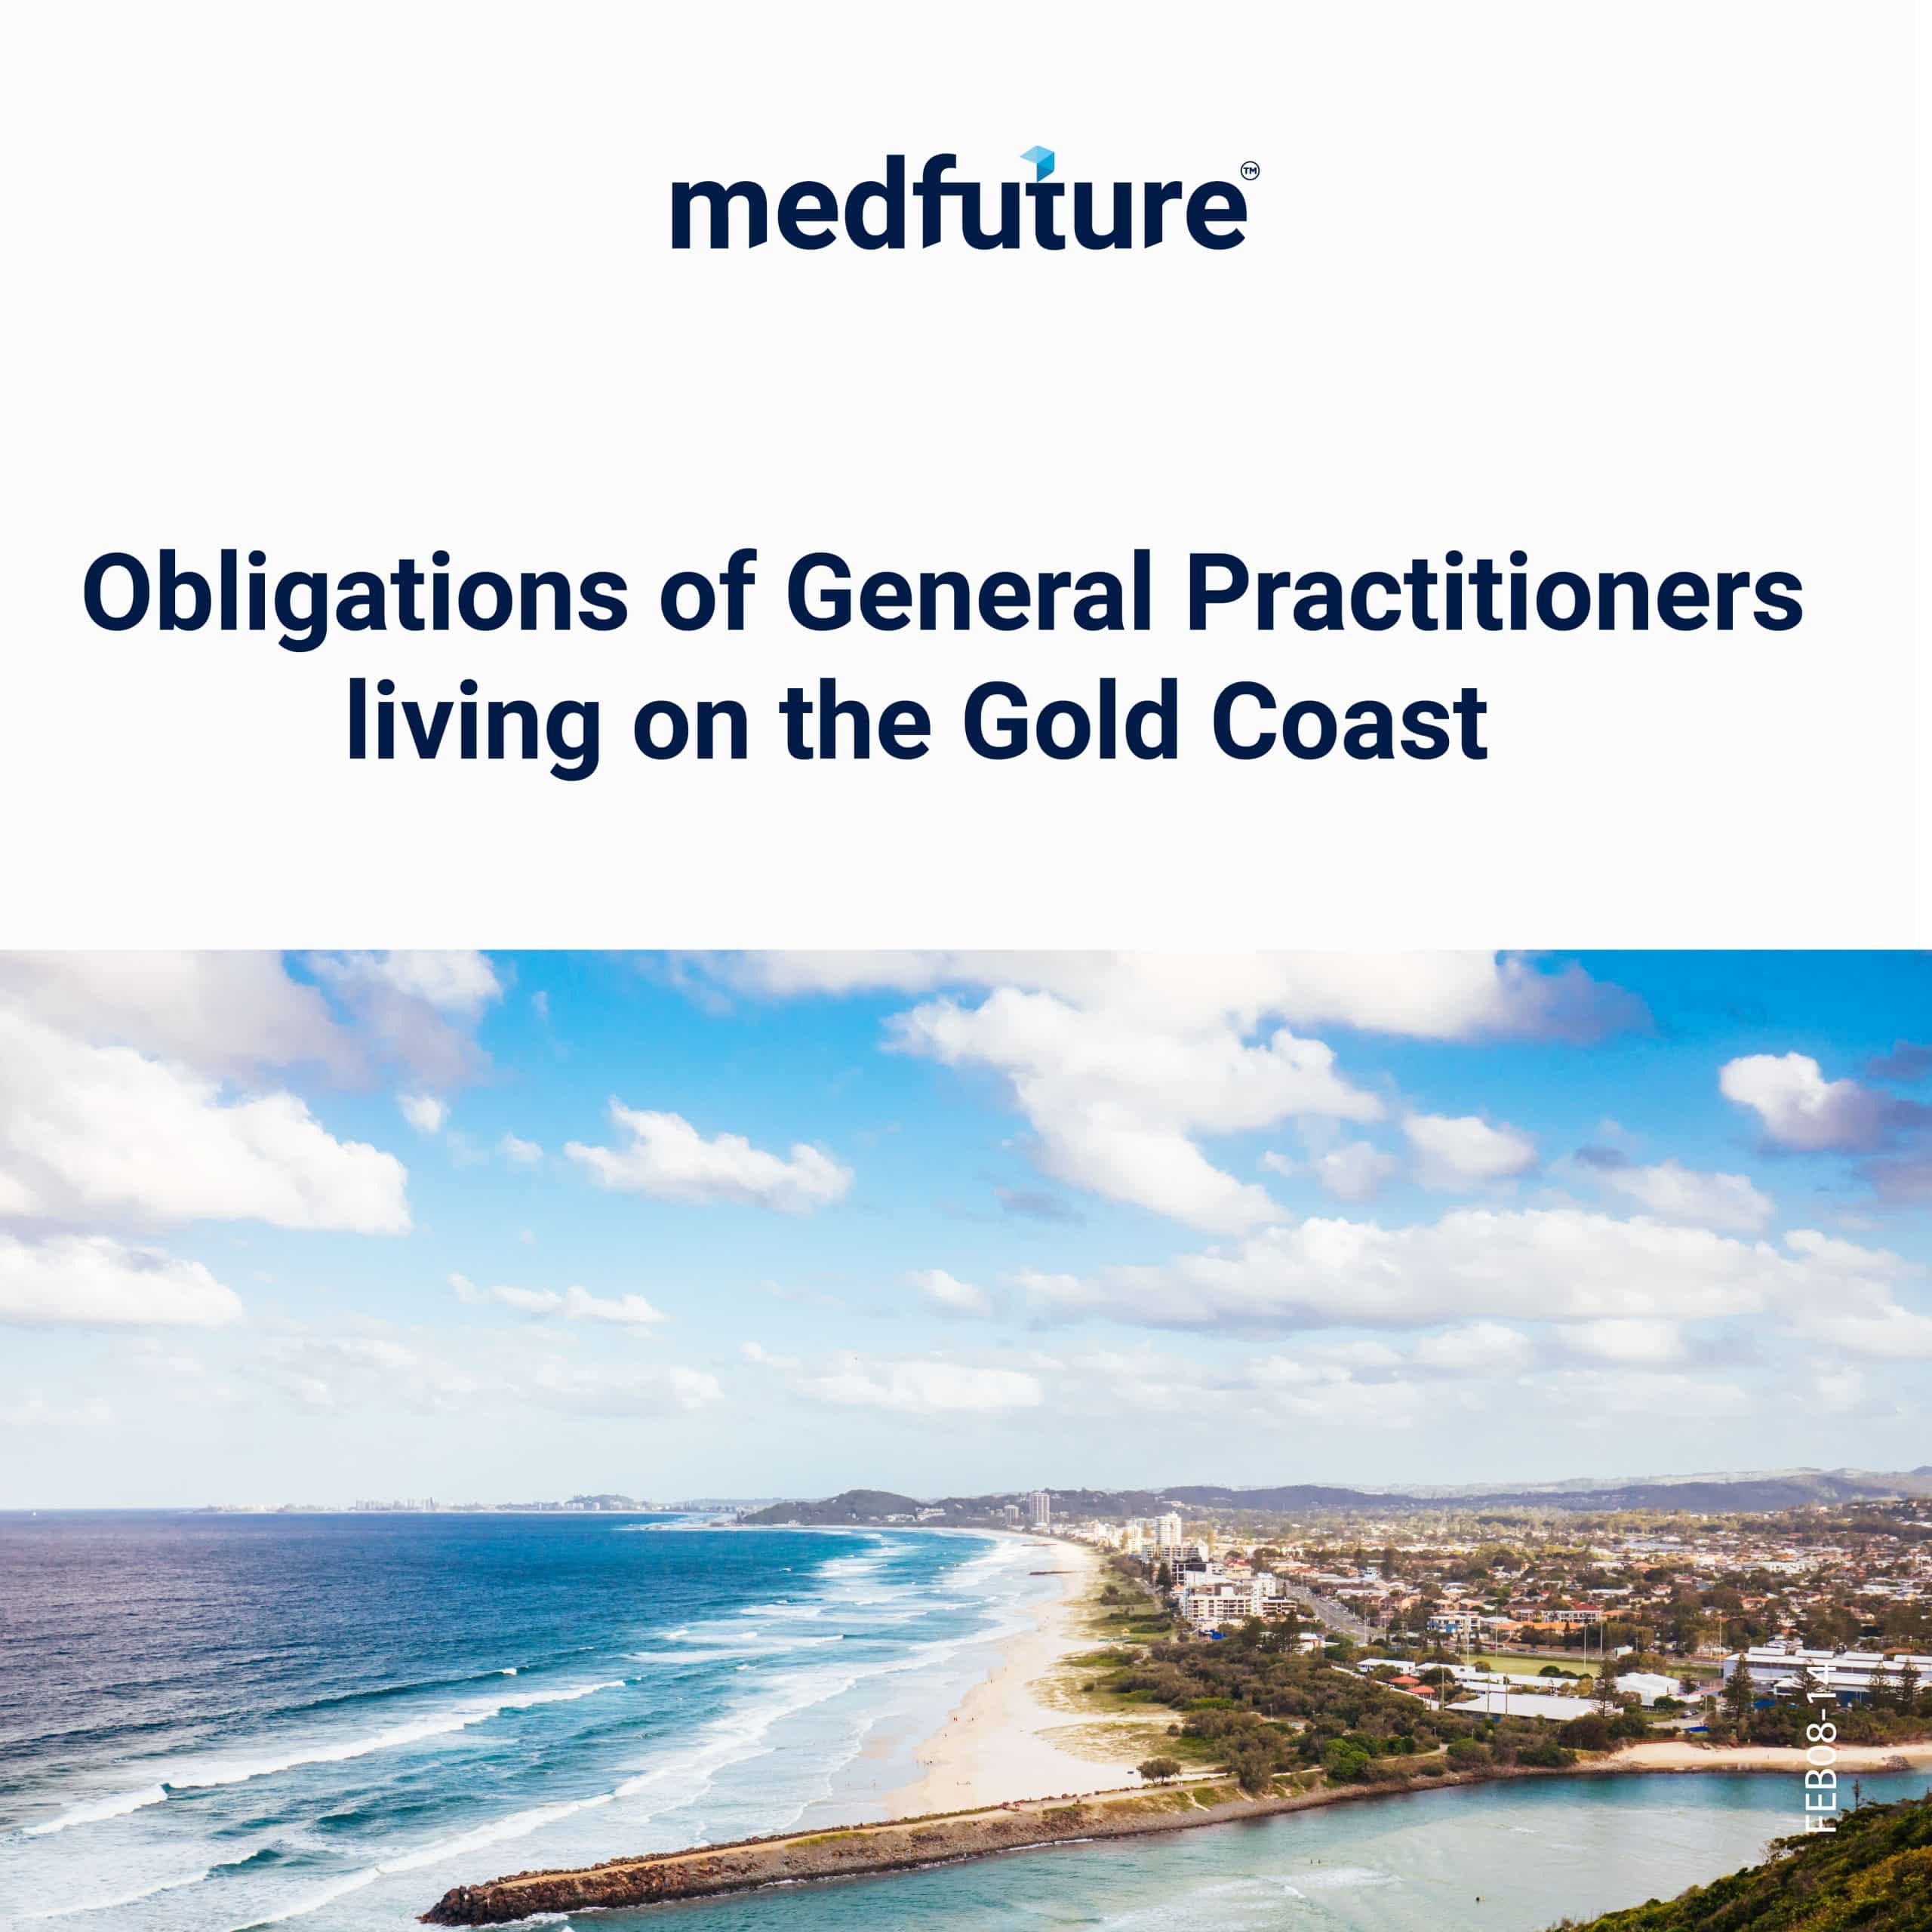 Obligations of General Practitioners living on the Gold Coast